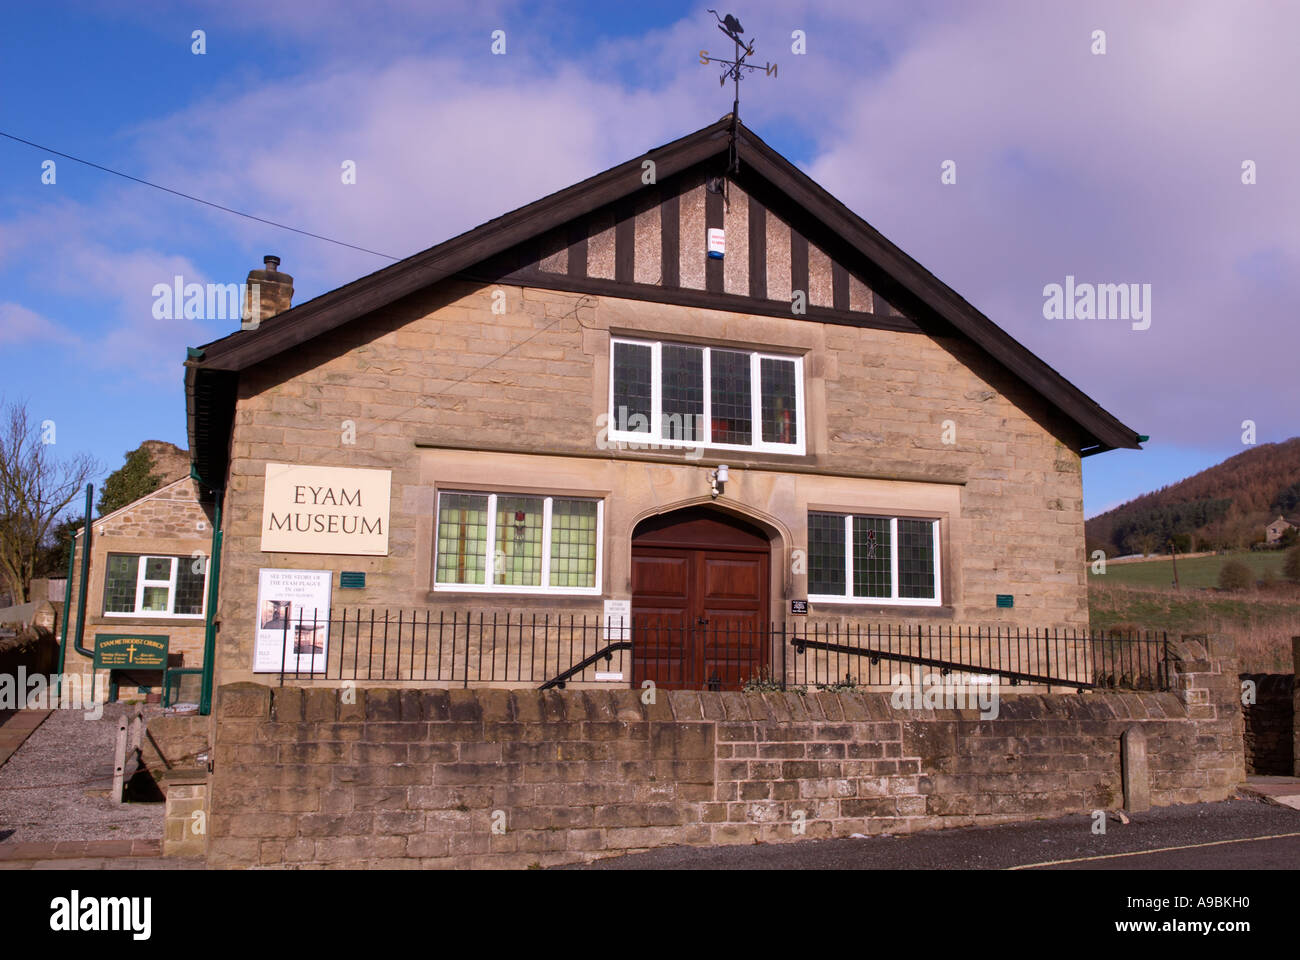 Eyam Museum in Derbyshire 'Great Britain' Stock Photo